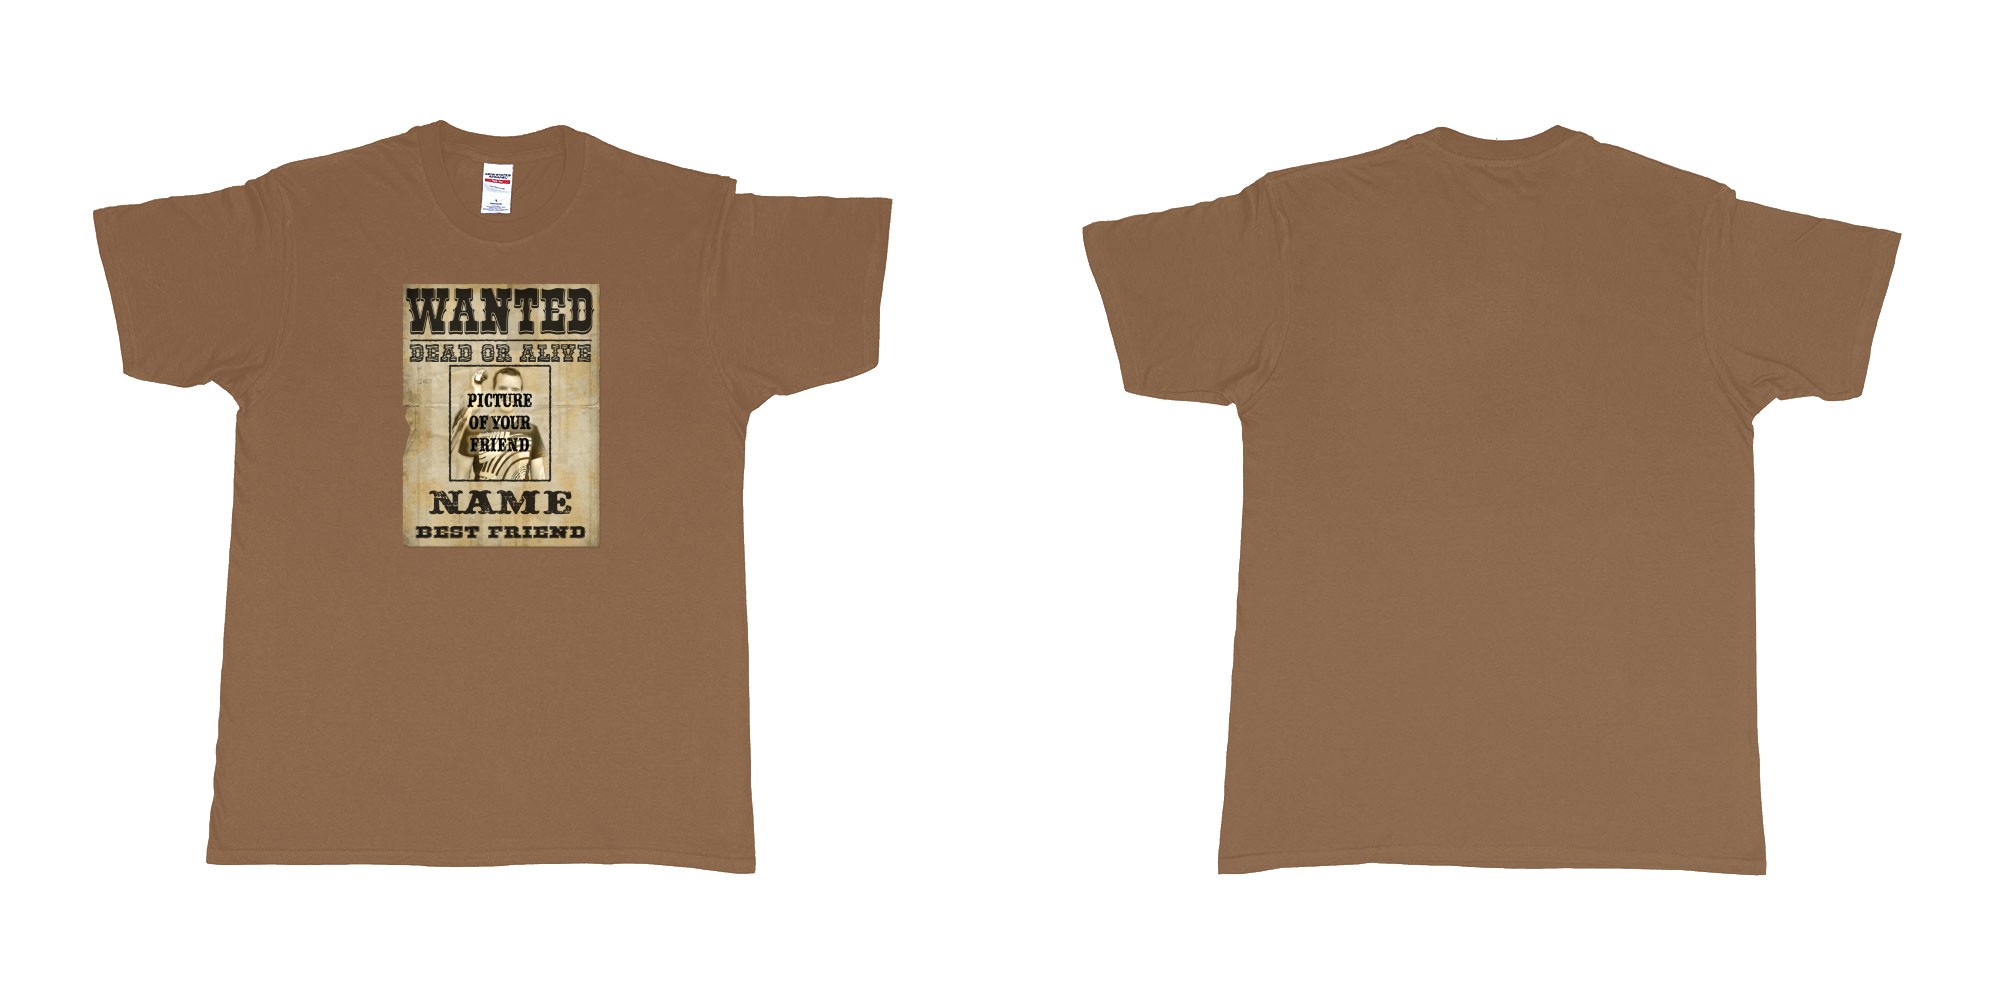 Custom tshirt design Wanted Poster in fabric color chestnut choice your own text made in Bali by The Pirate Way